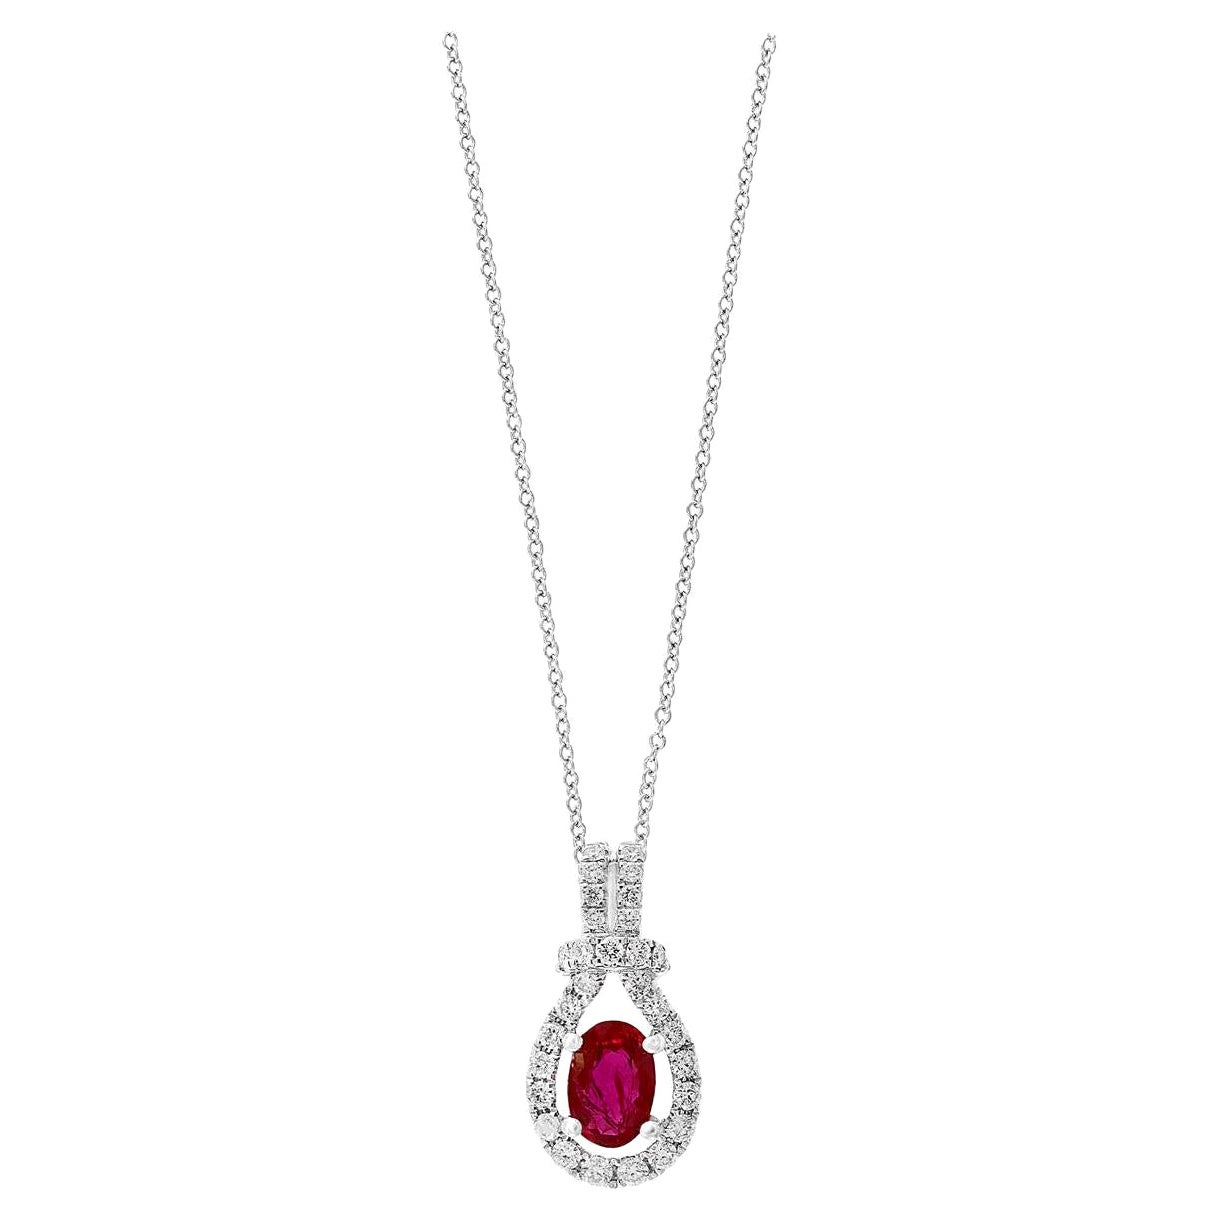 0.51 Carat Pear Shape Ruby and Diamond Drop Pendant in 18K White Gold